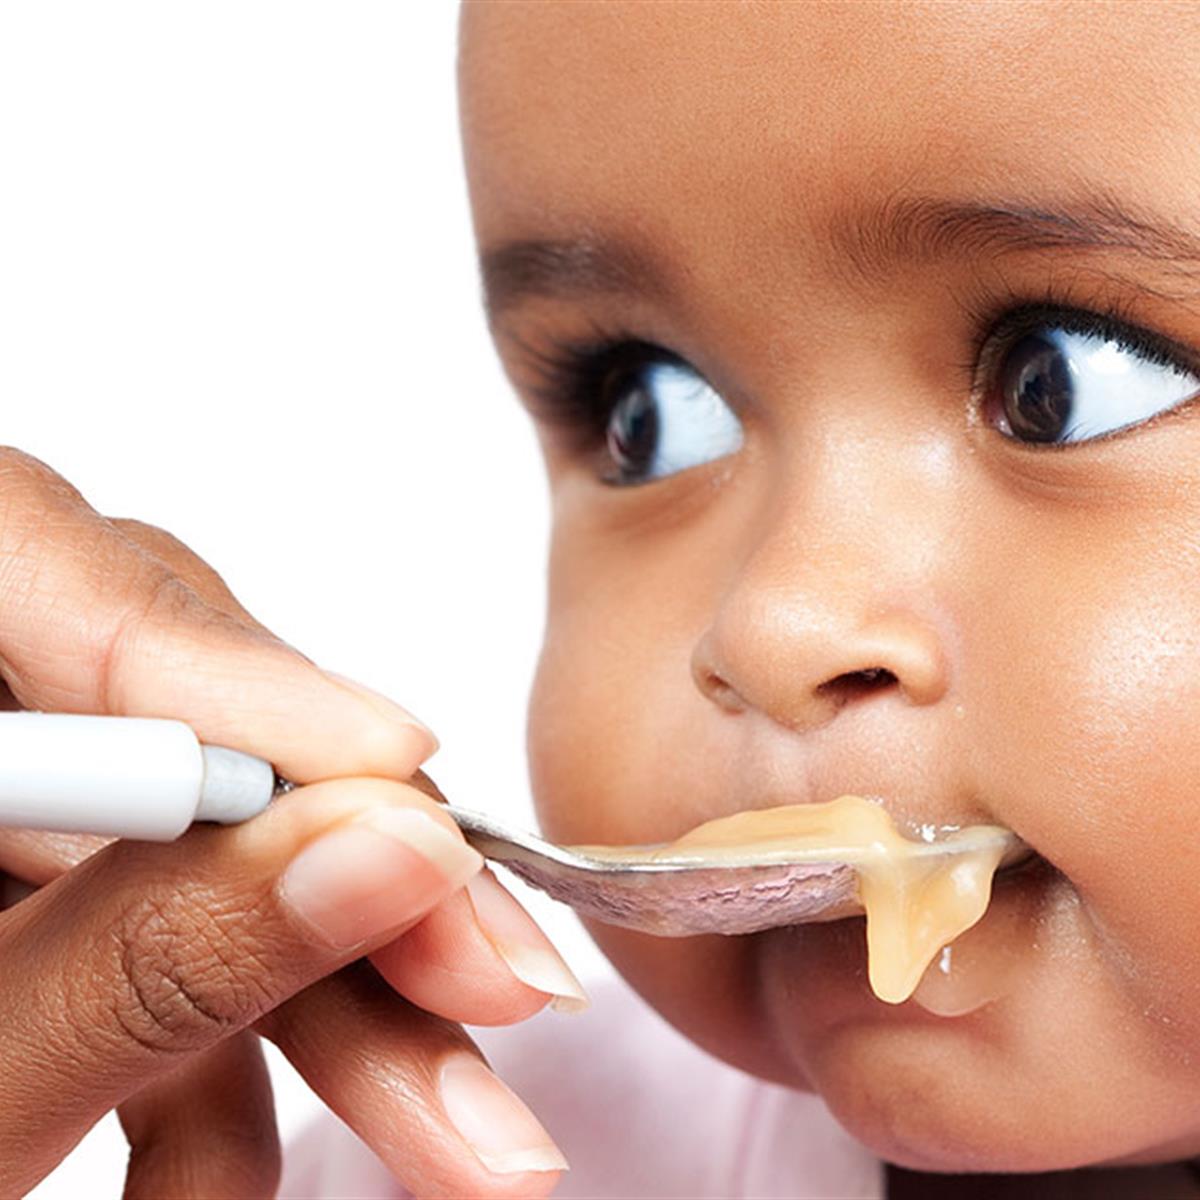 Heavy Metals in Baby Food: Why Did the FDA Find Toxic Metals in Baby Food